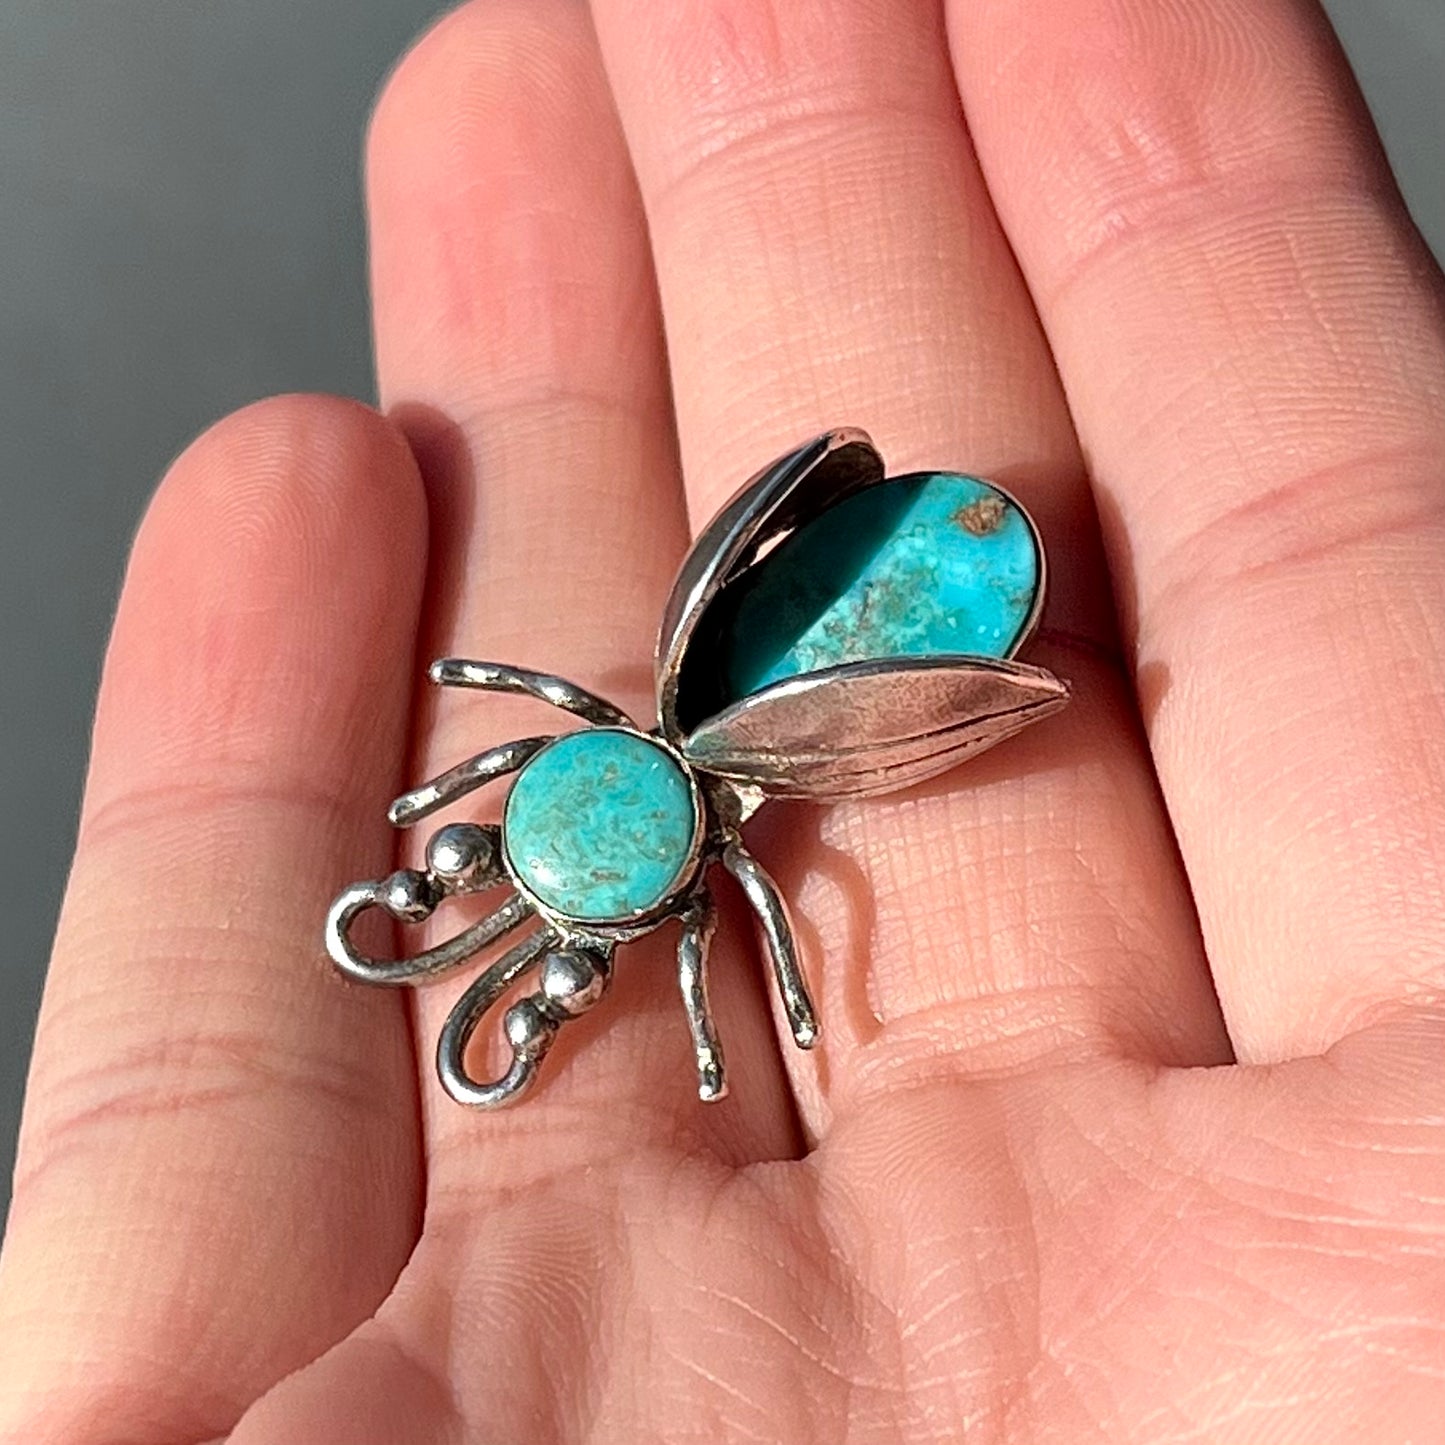 A sterling silver brooch made in the shape of a bee set with two turquoise stones for the head and body.